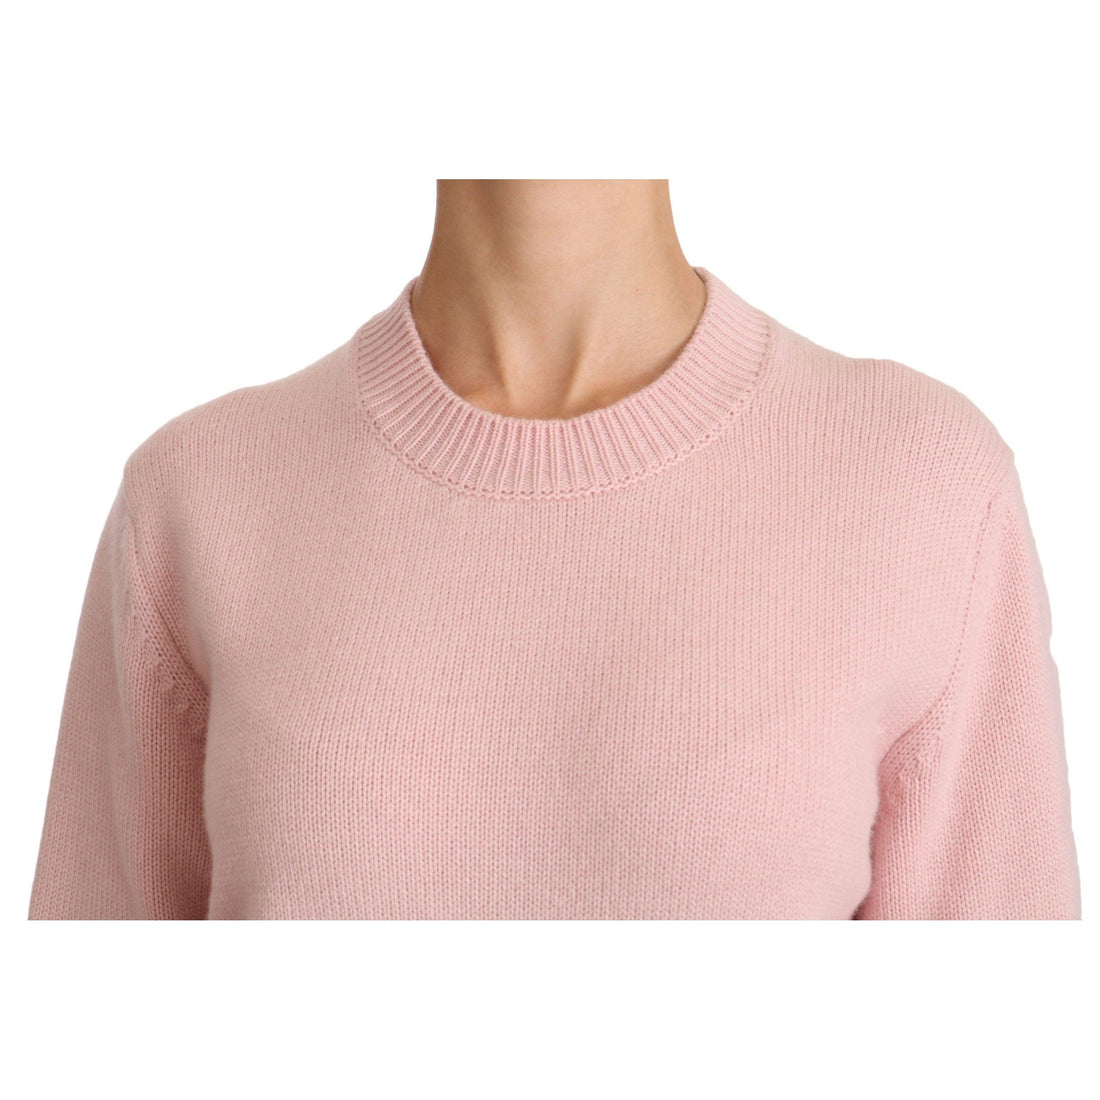 Dolce & Gabbana Pink Crew Neck Cashmere Pullover Sweater - Paris Deluxe